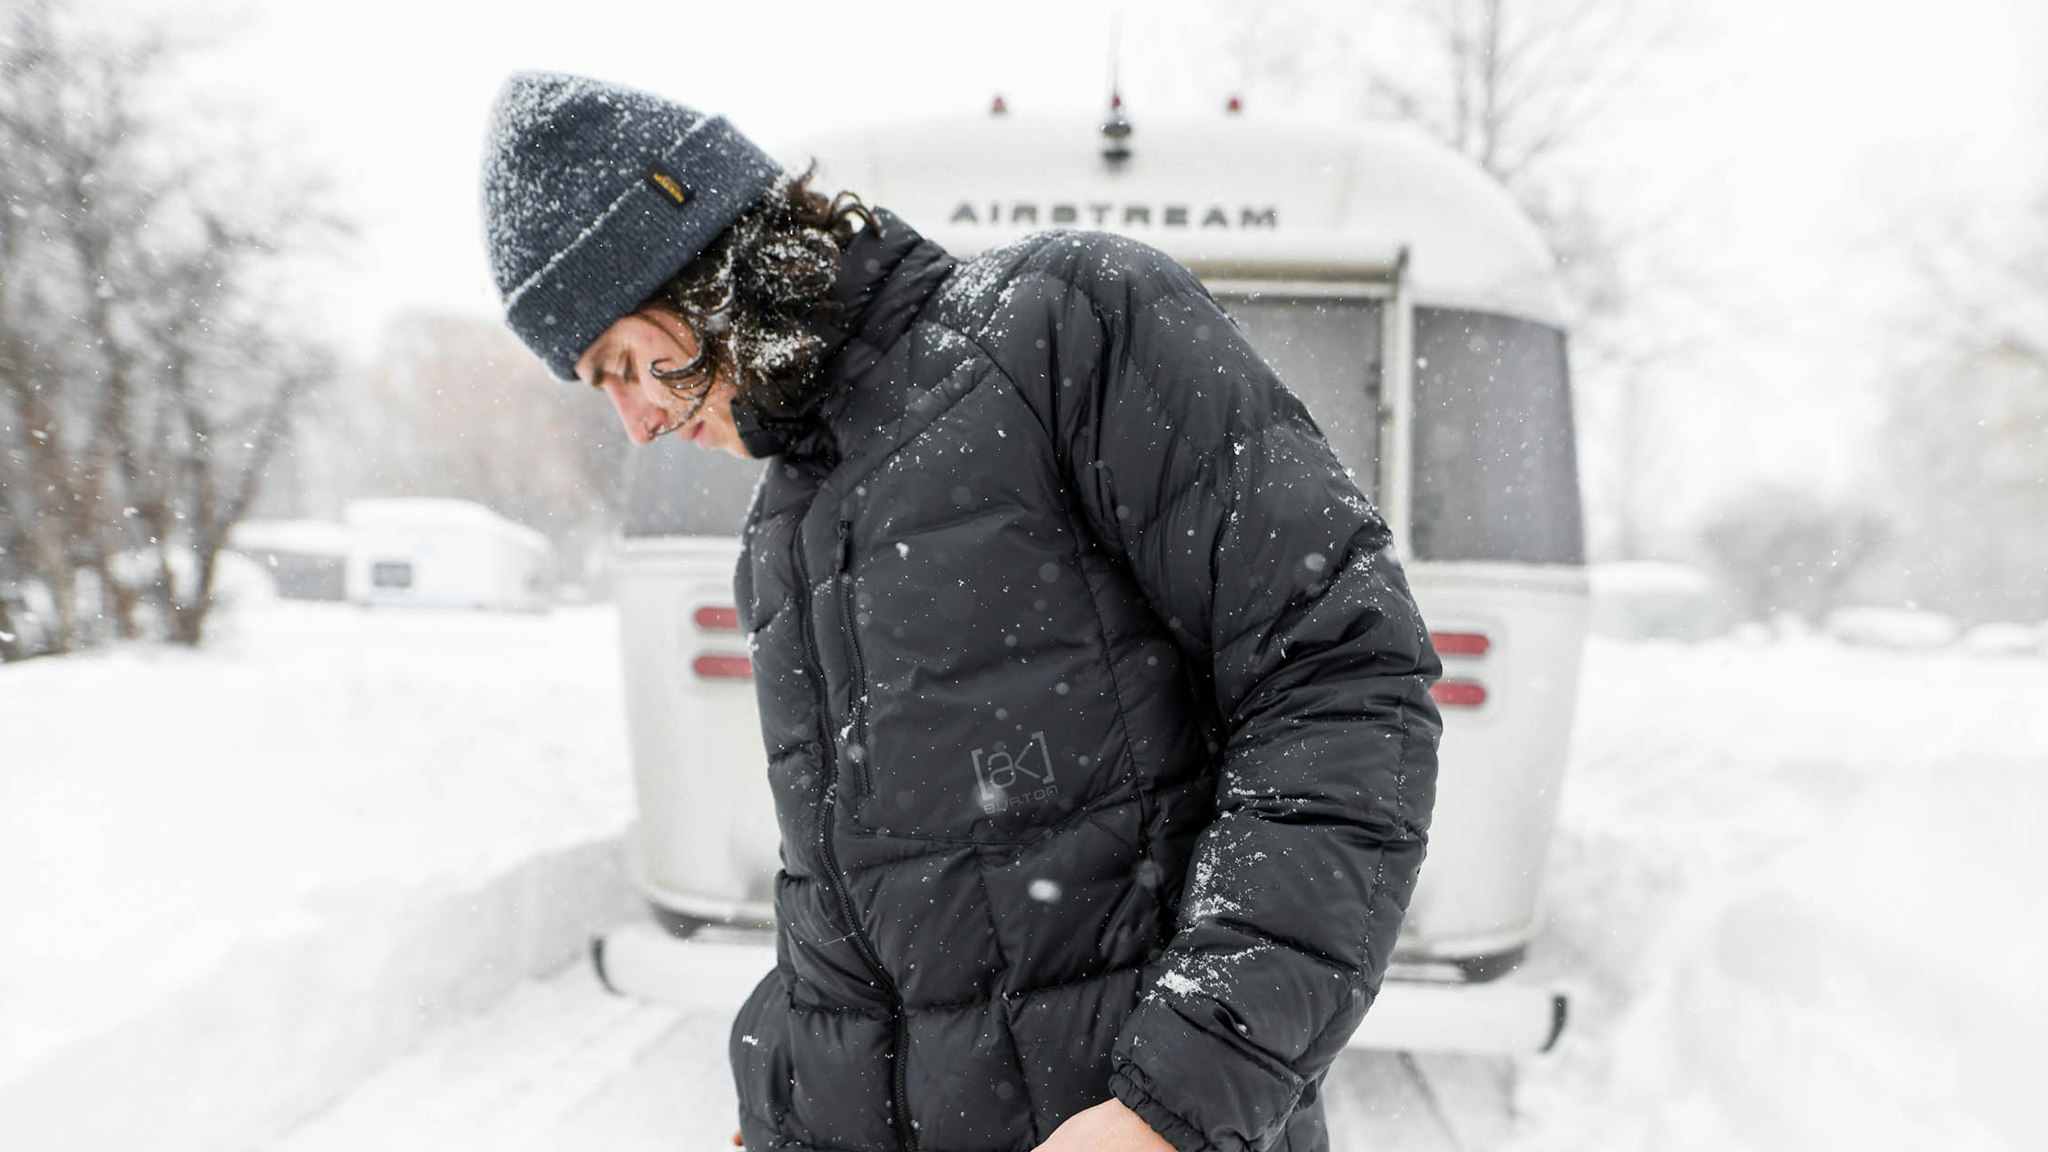 How To Take a Winter Camping Trip in a Travel Trailer - Airstream